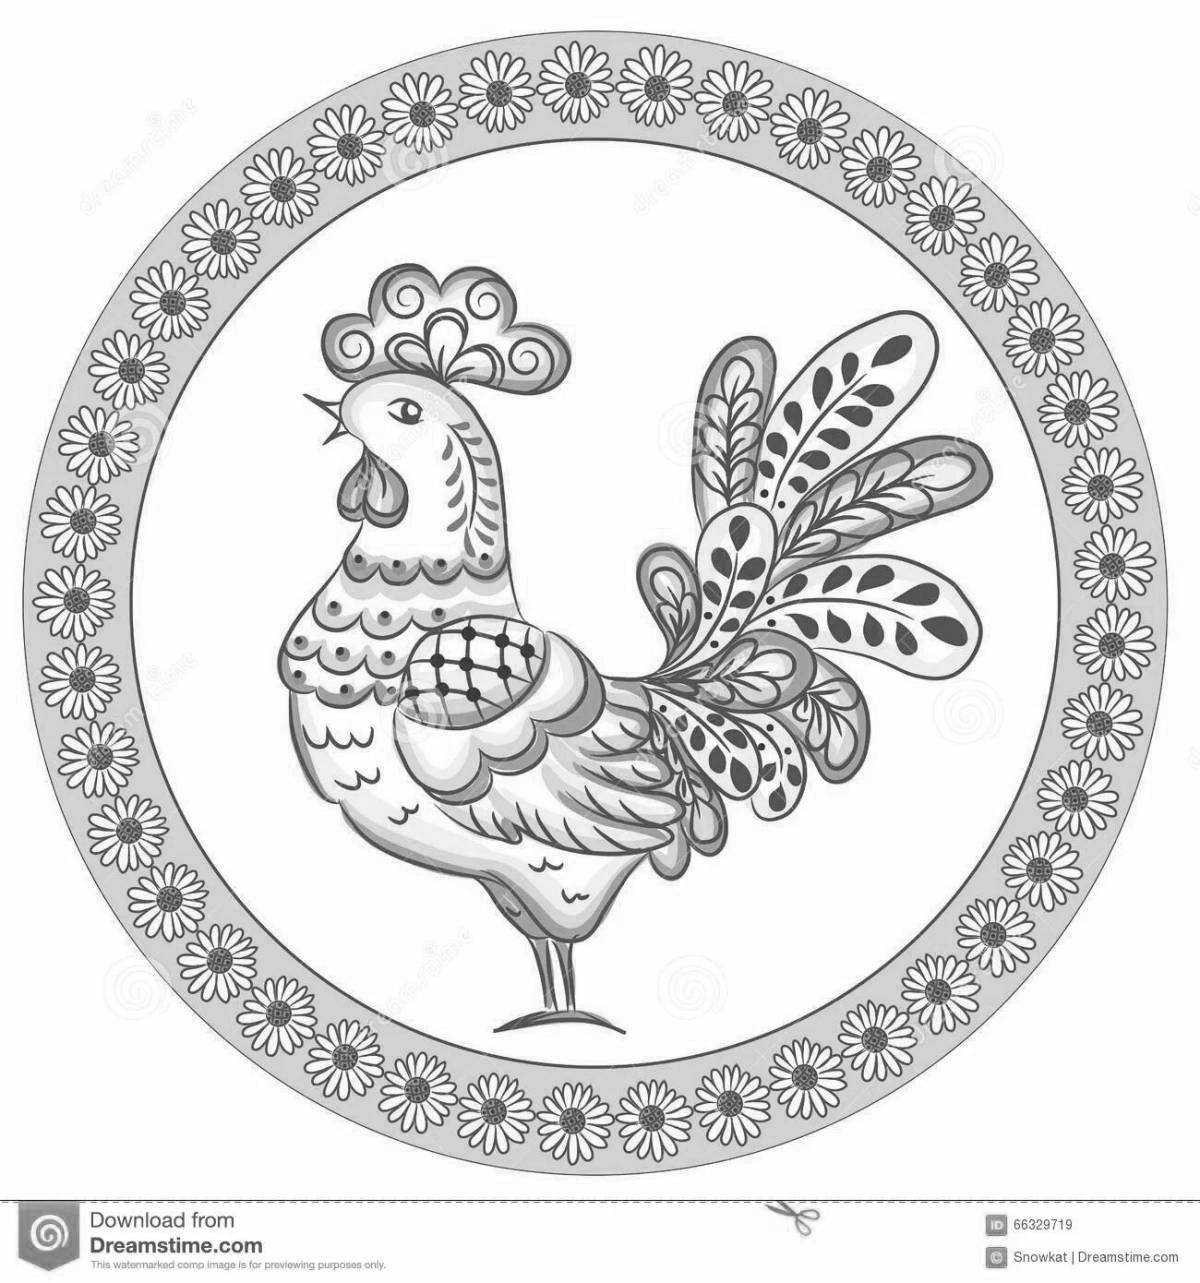 Coloring book royal gzhel rooster